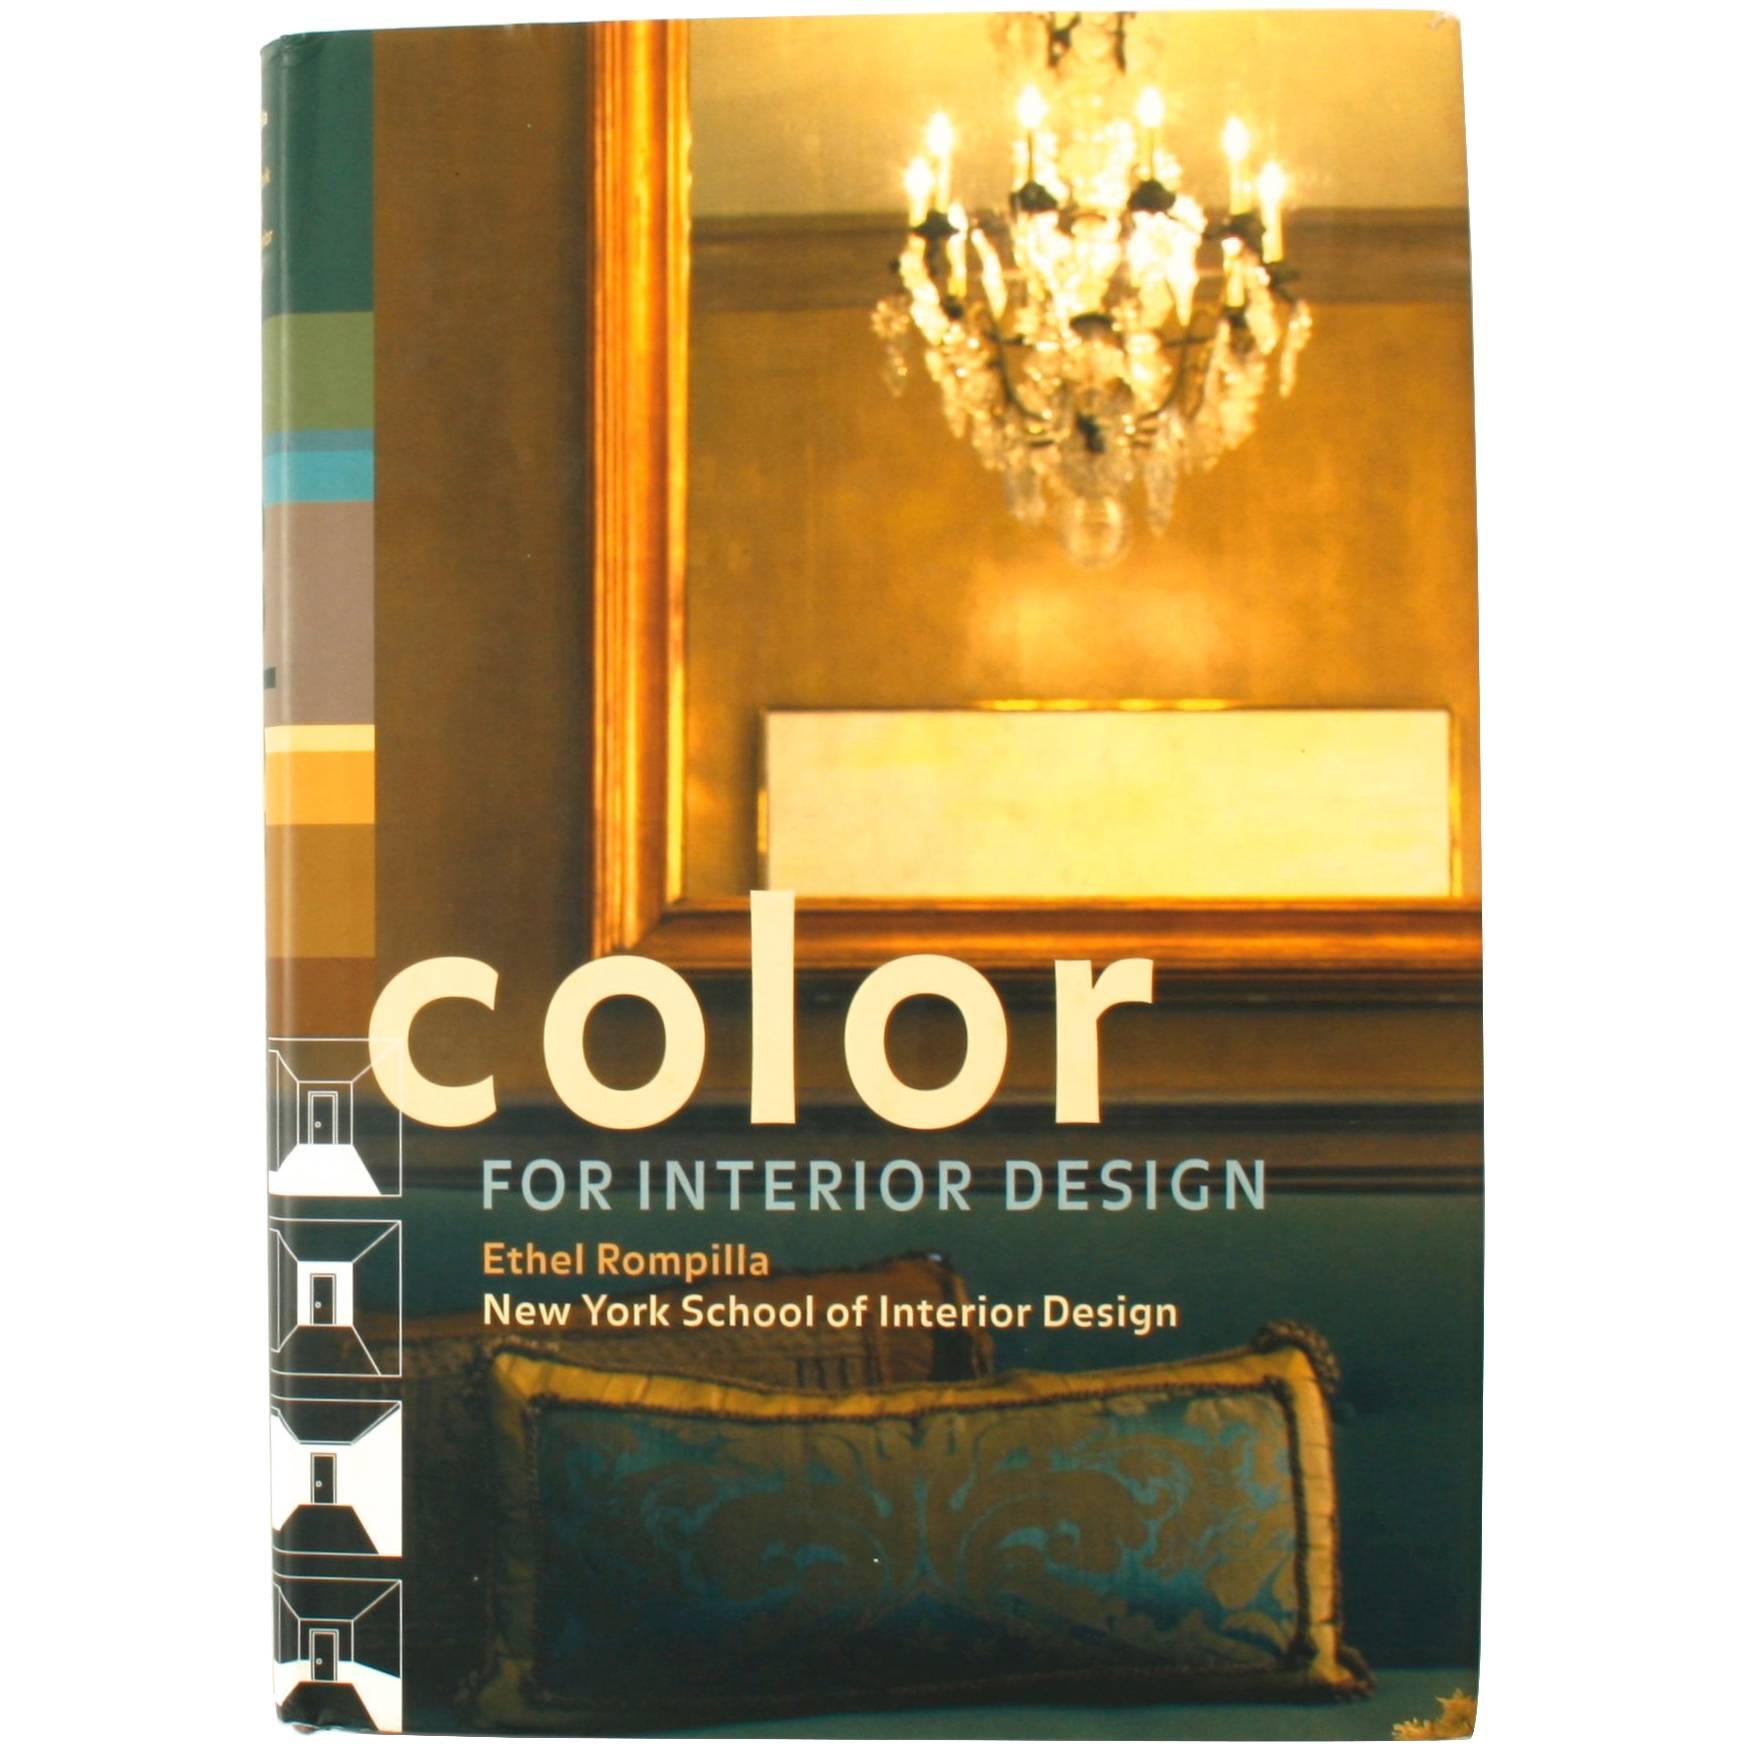 "Color For Interior Design" Book by Ethel Rompilla, First Edition